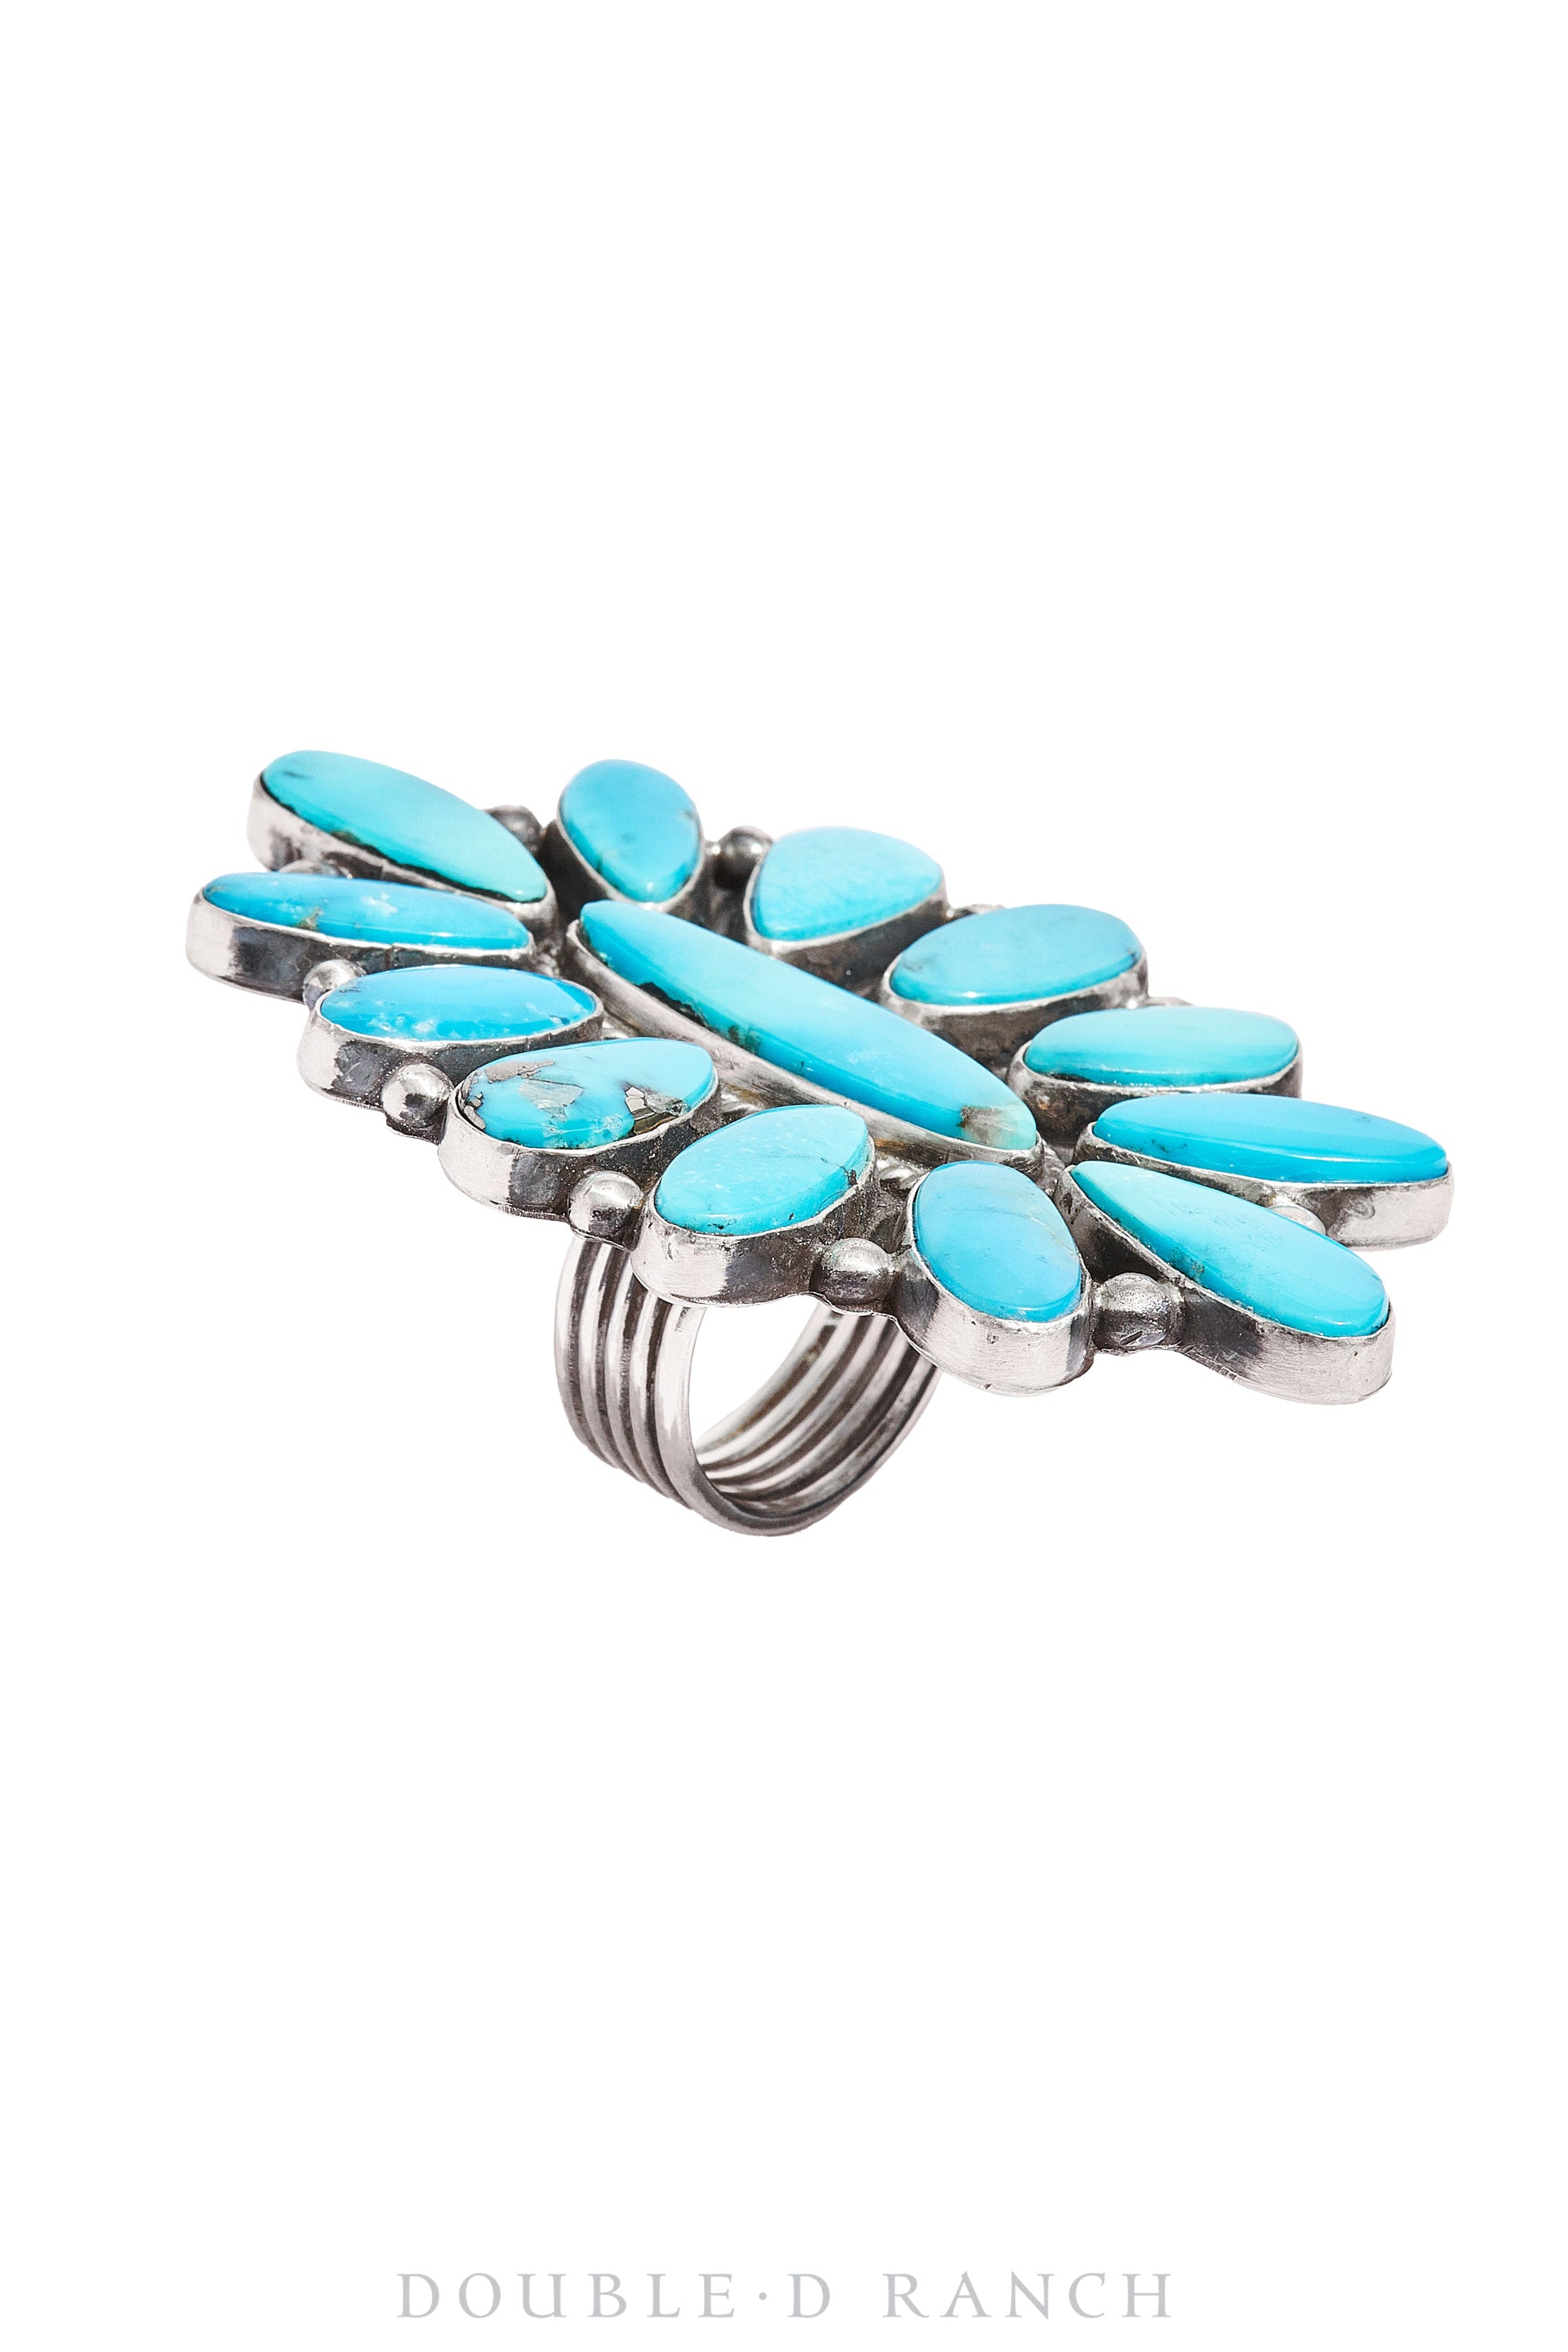 Ring, Cluster, Turquoise, Hallmark, Contemporary, 1070